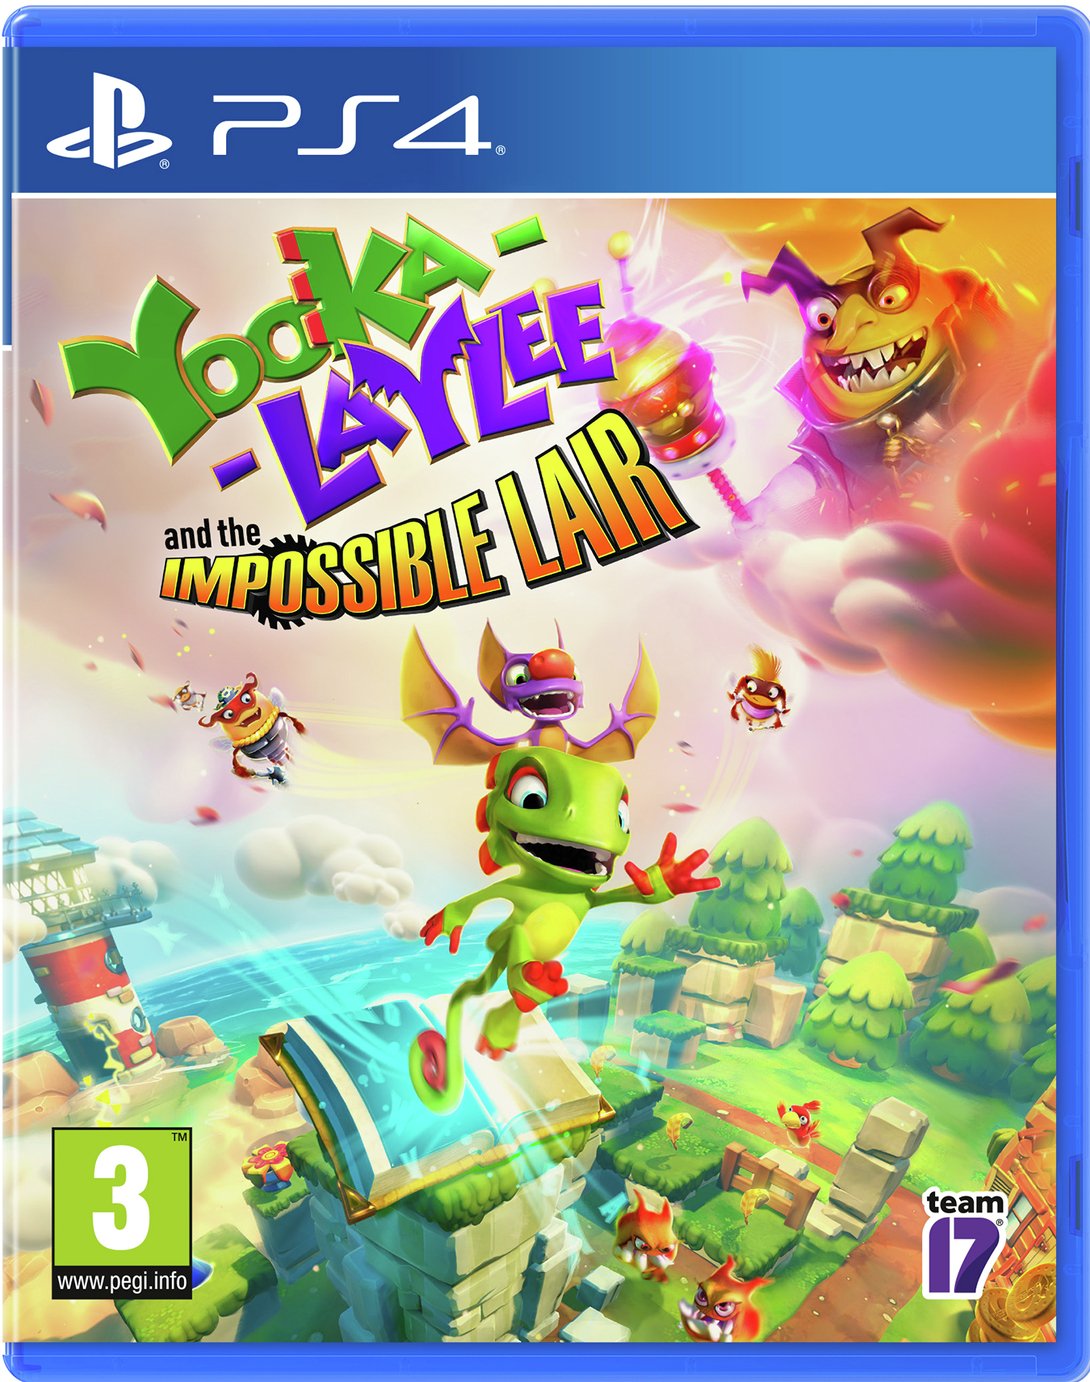 Yooka Laylee and the Impossible Lair PS4 Game Review